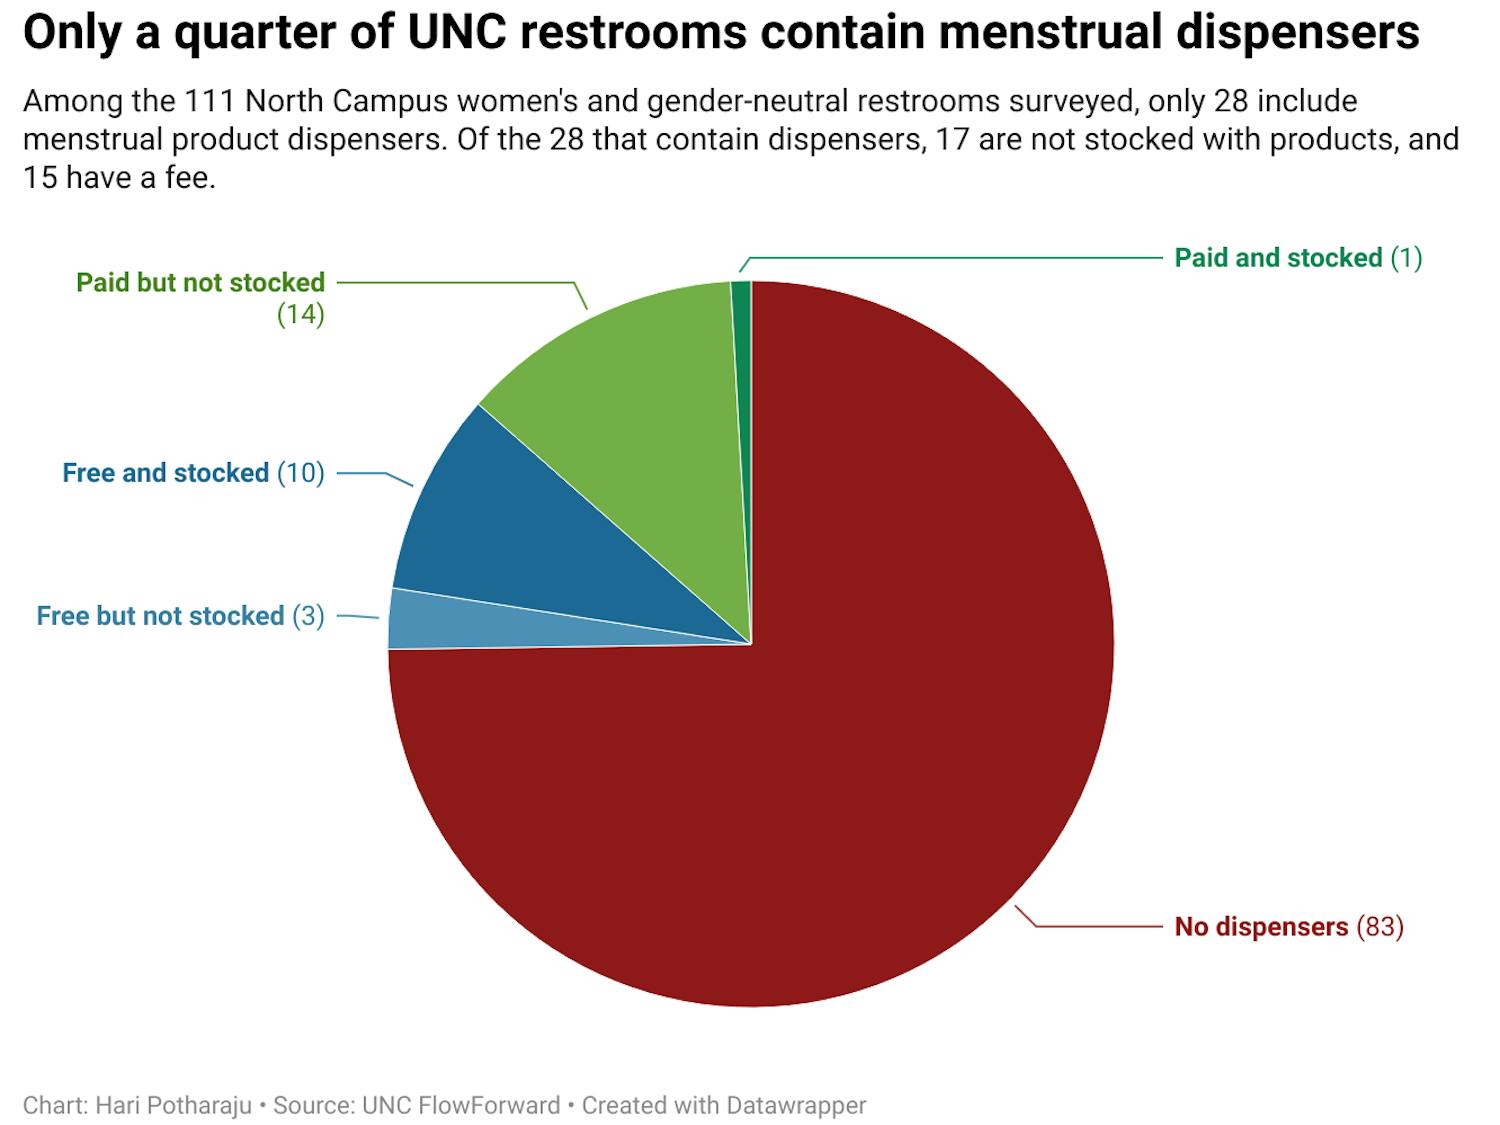 Visualization: Only a quarter of UNC restrooms contain menstrual dispensers